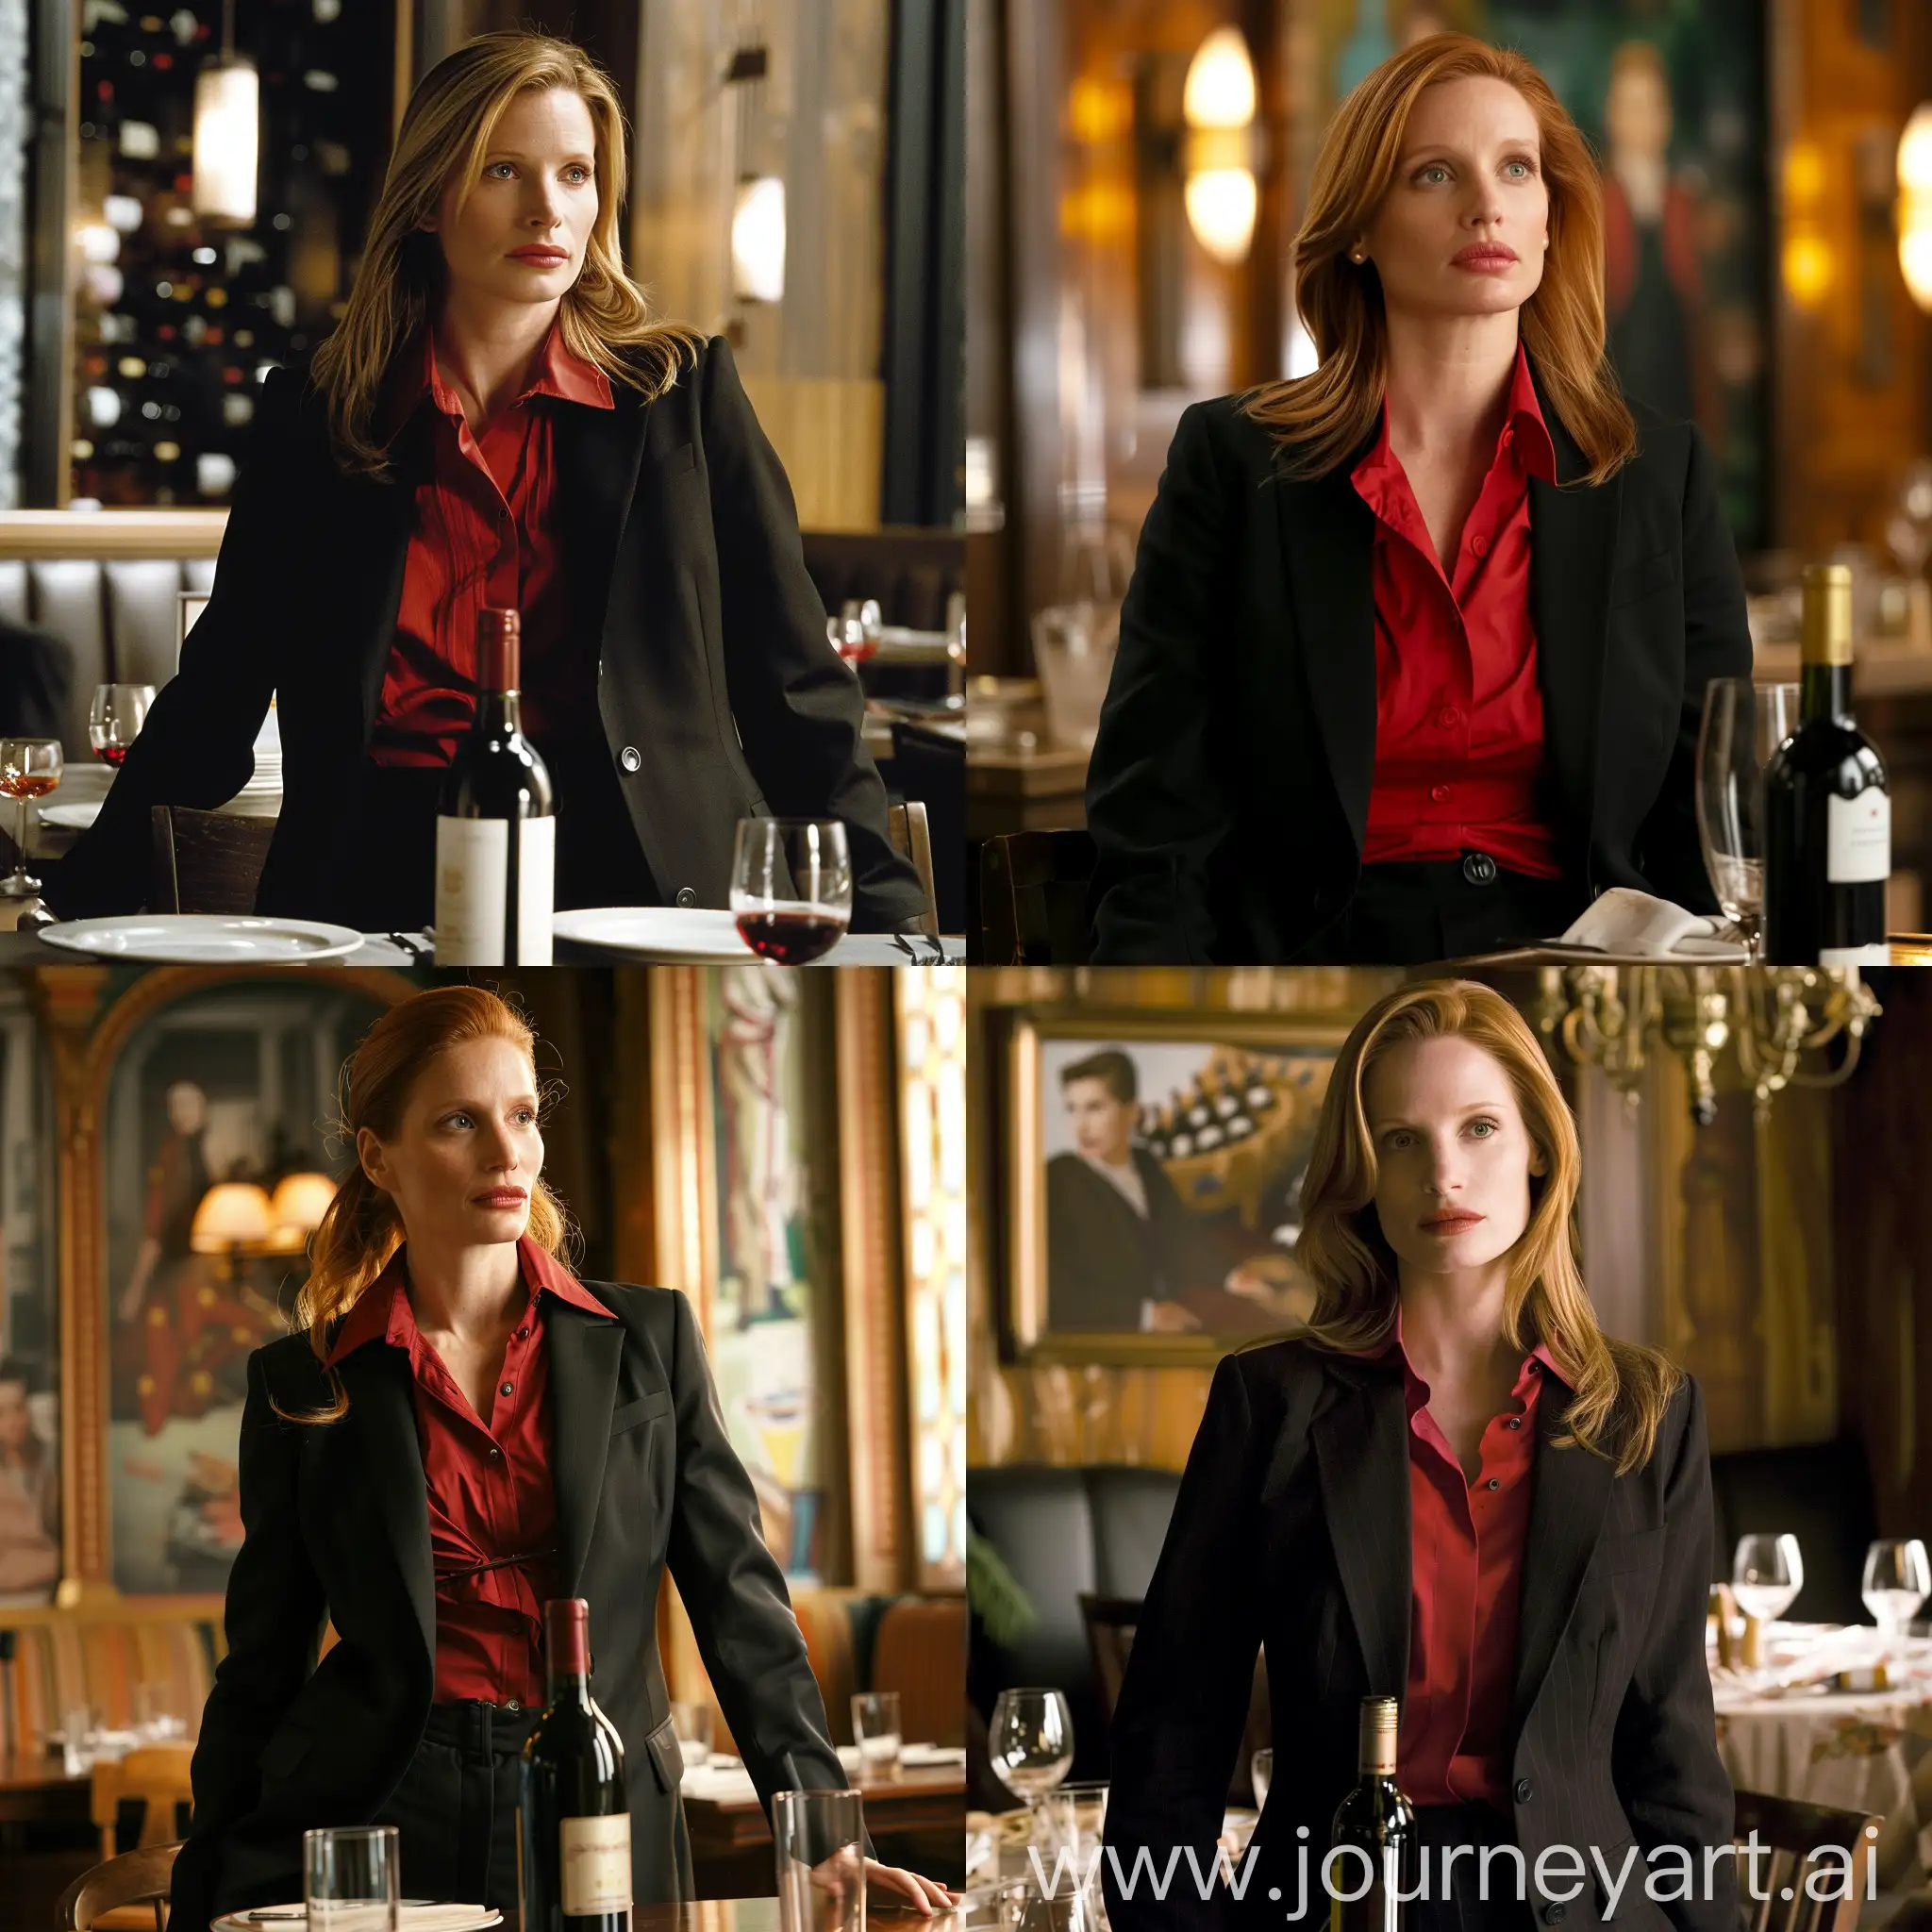 Jessica-Chastain-in-Elegant-Business-Attire-at-a-Refined-Restaurant